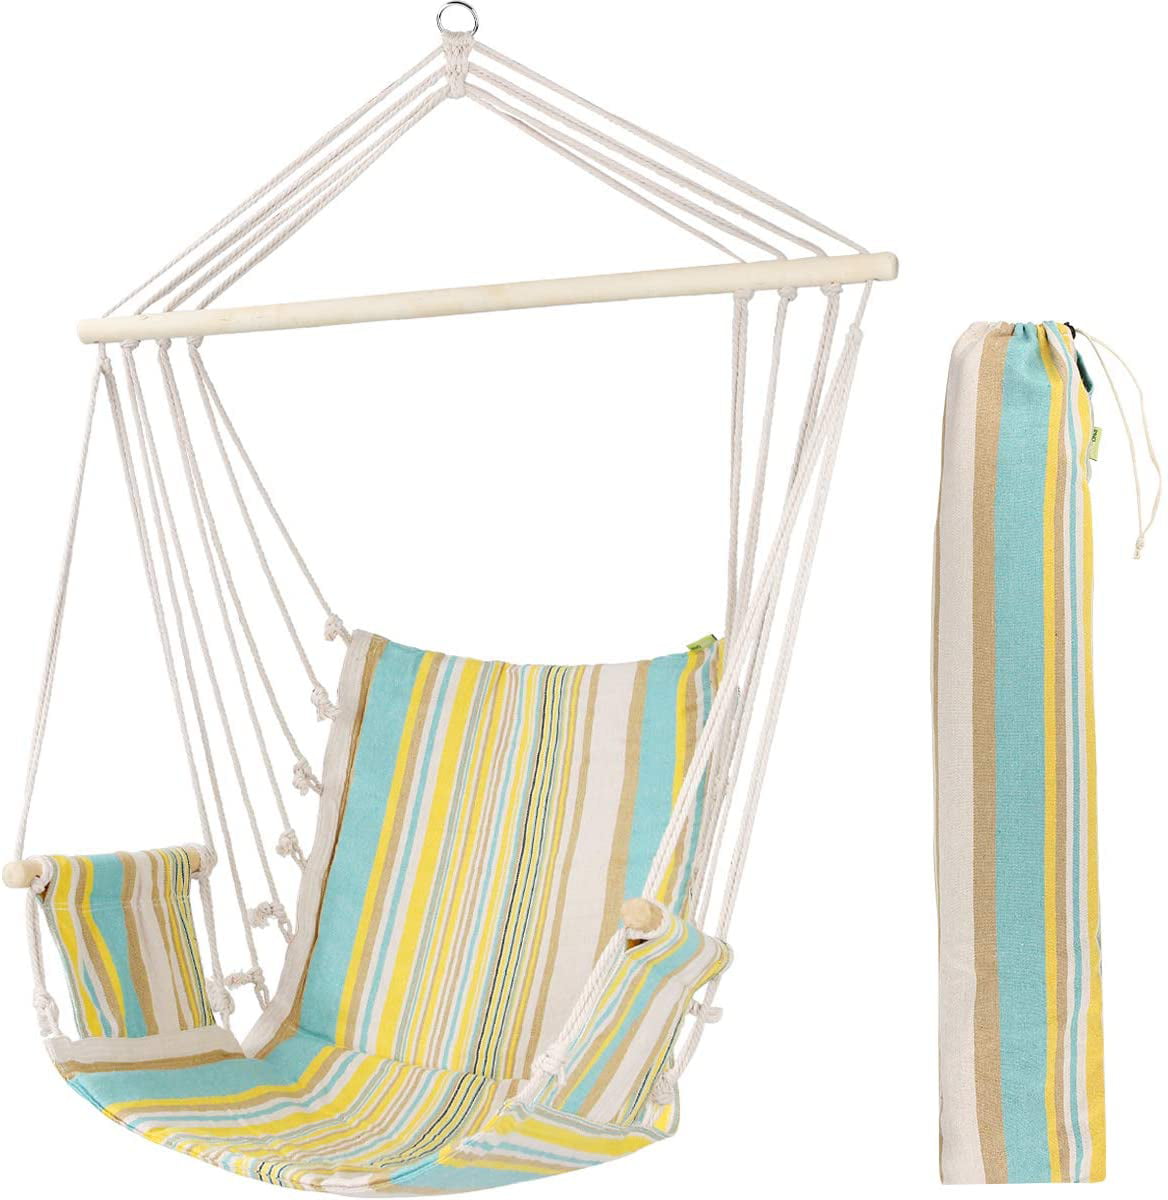 Hammock Chair Hanging Rope Swing with Armrests Macrame Hanging Chair with Pocket Quality Cotton Weave for Superior Comfort & Durability 